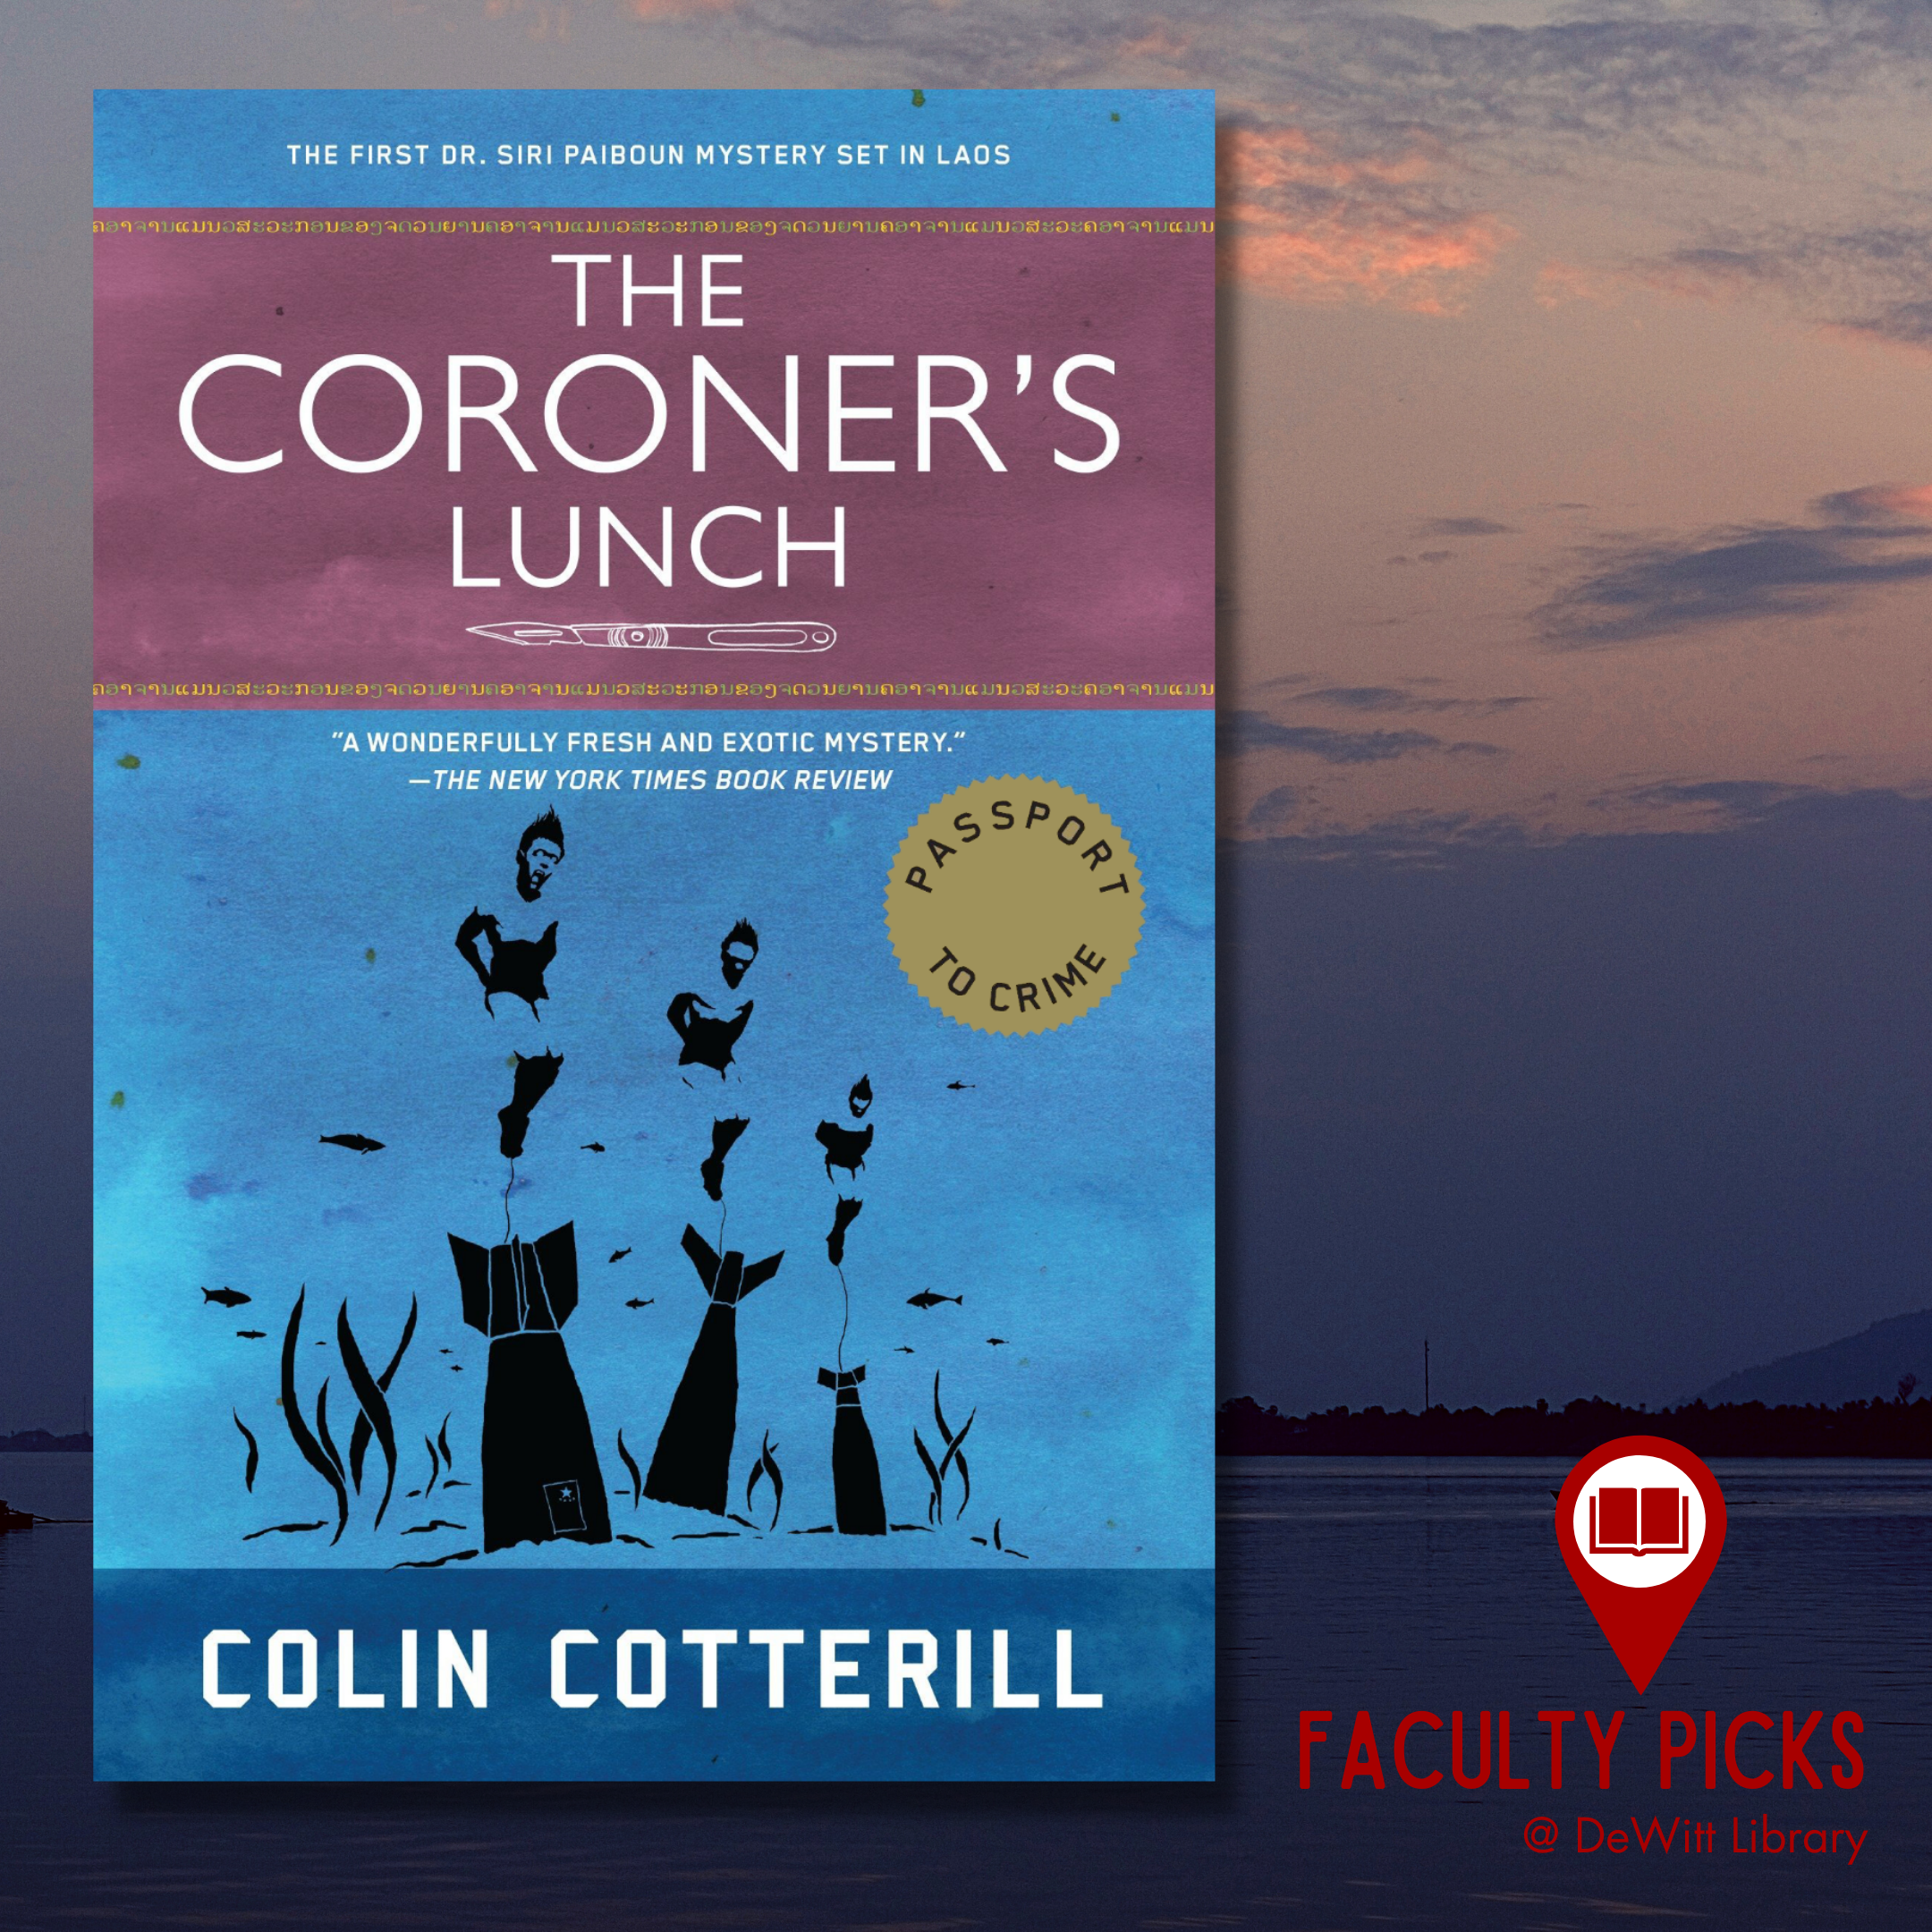 Faculty Picks at DeWitt Library - The Coroner's Lunch by Colin Cotterill